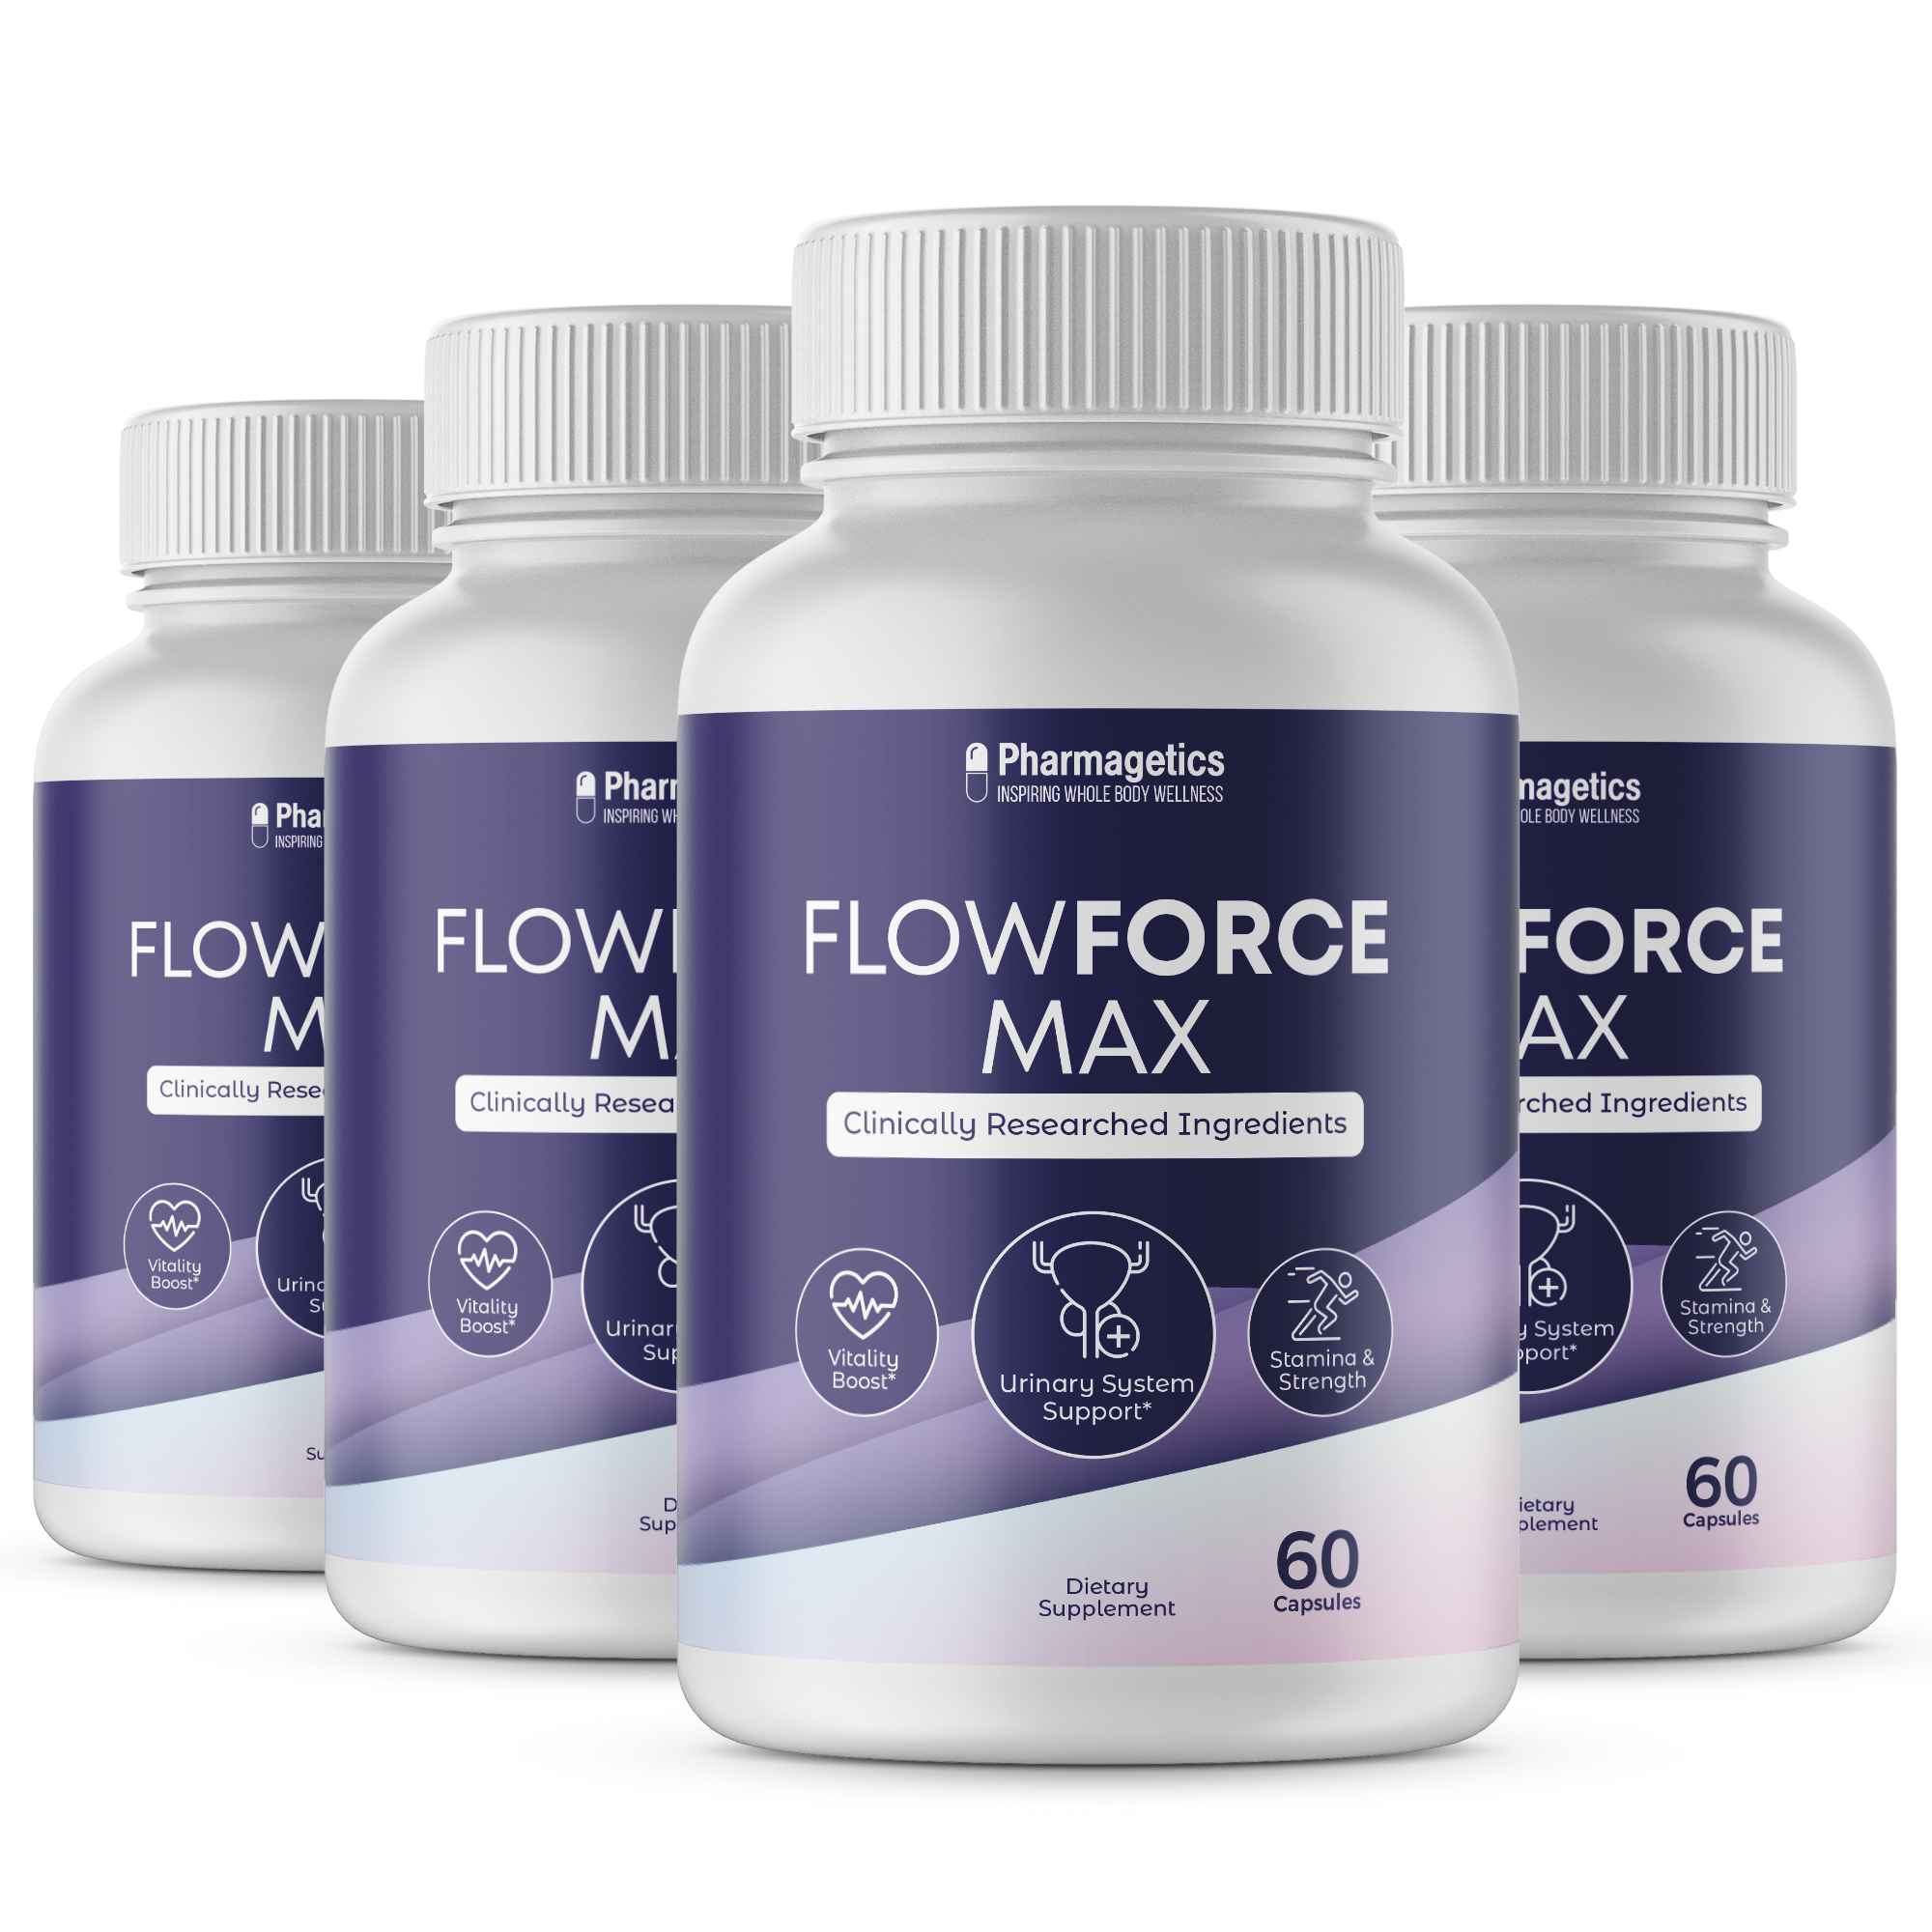 Flowforce Max Prostate Support Supplement Reduce Frequent Urination Flow Force Max - 4 Bottles